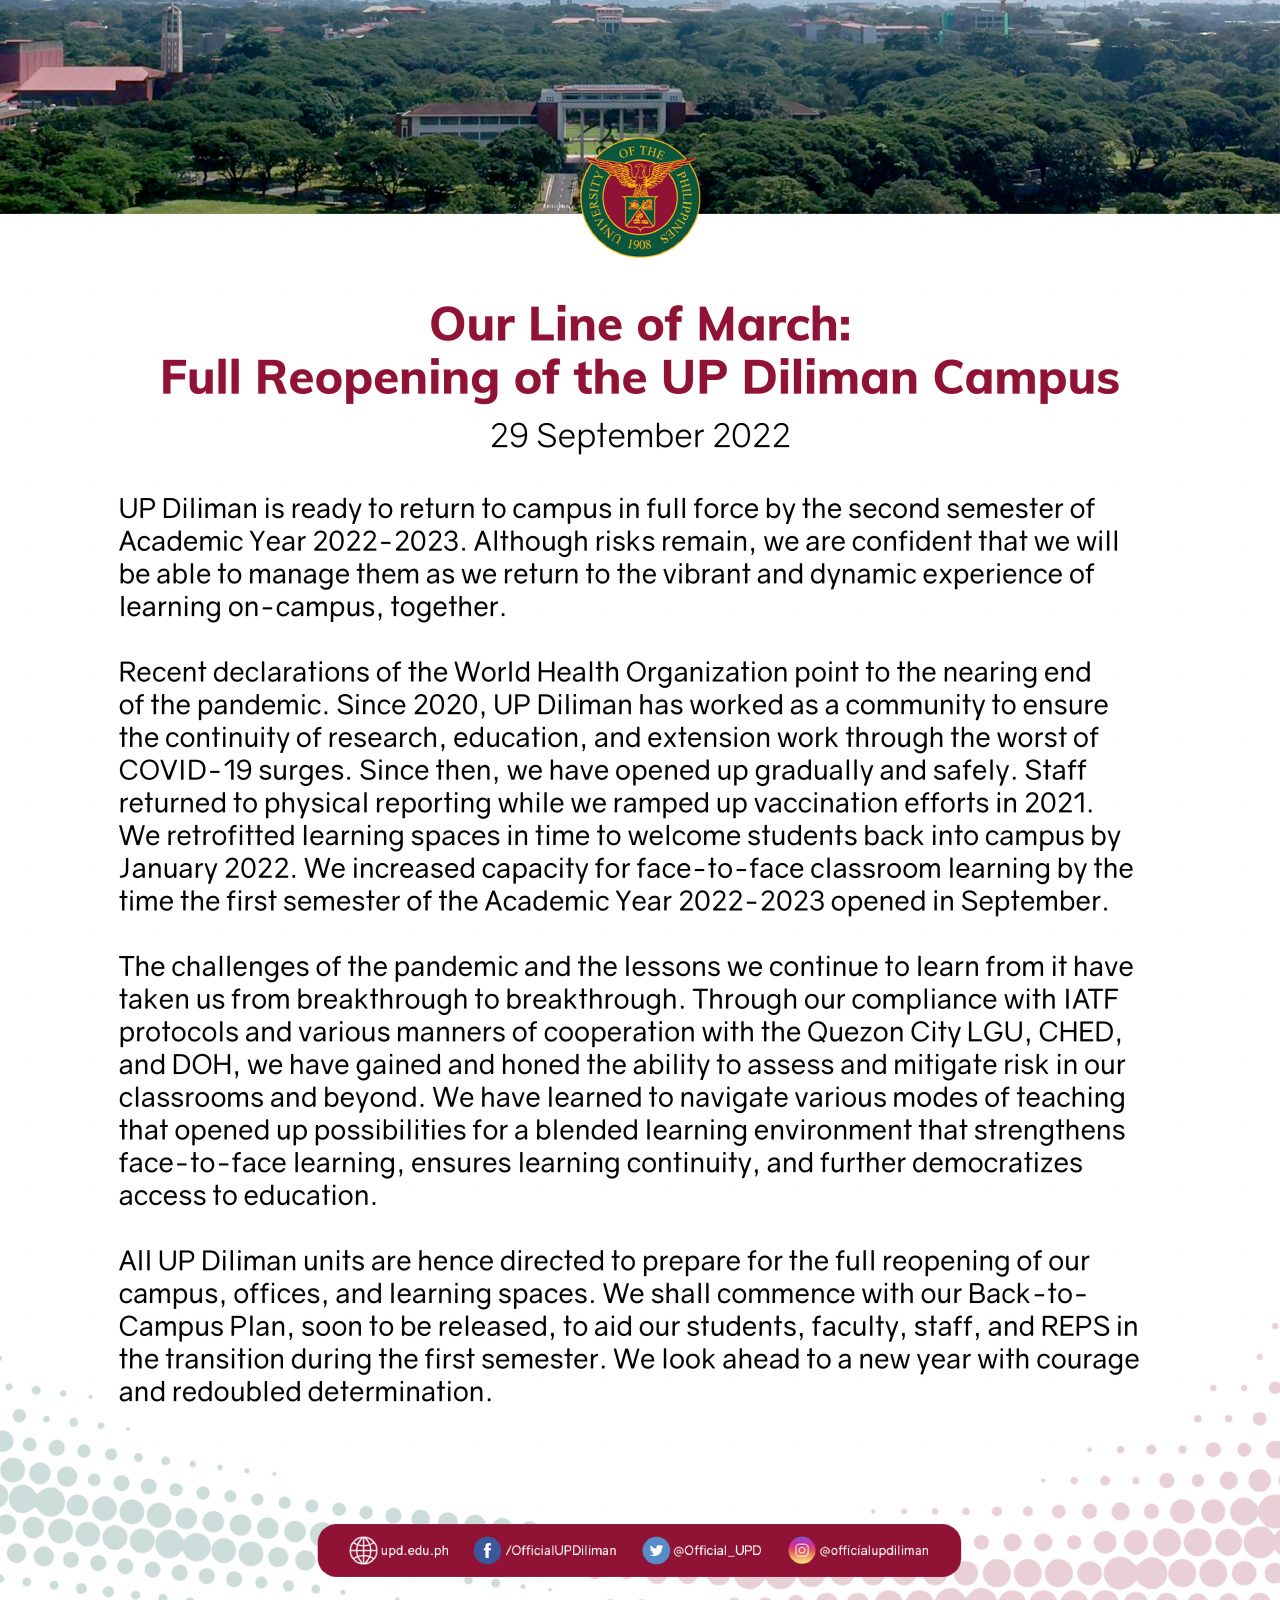 Our Line of March Full Reopening of the UP Diliman Campus  University